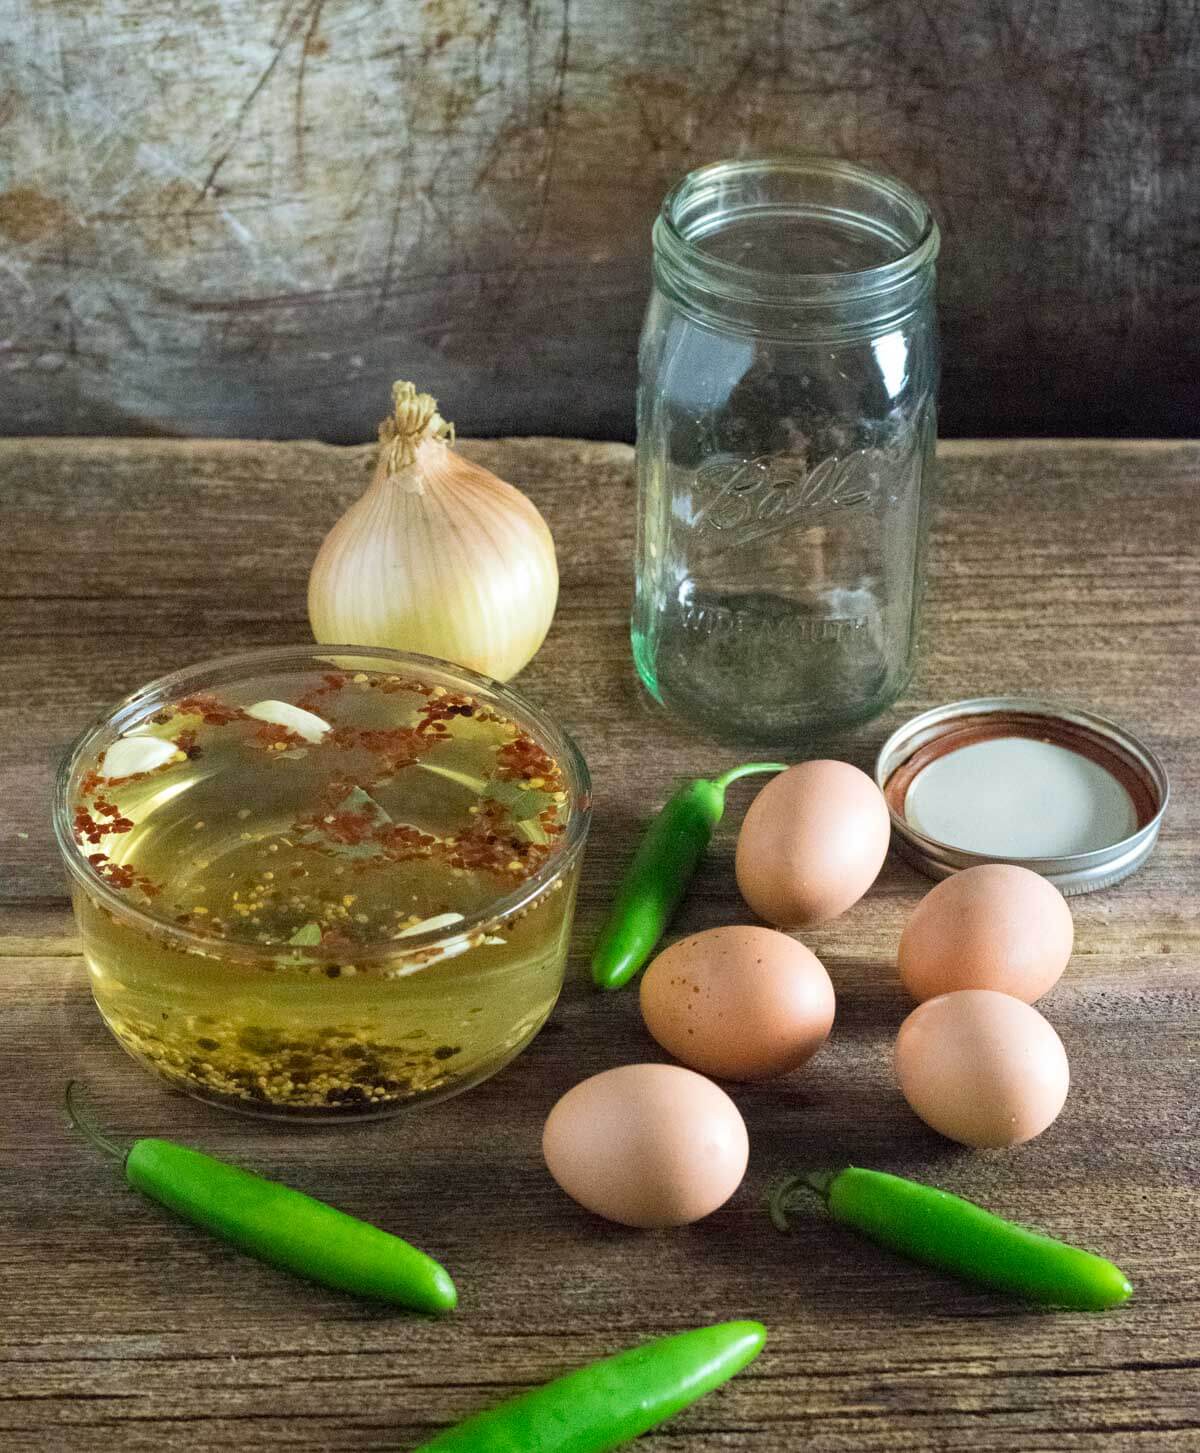 Showing ingredients for spicy pickled eggs.